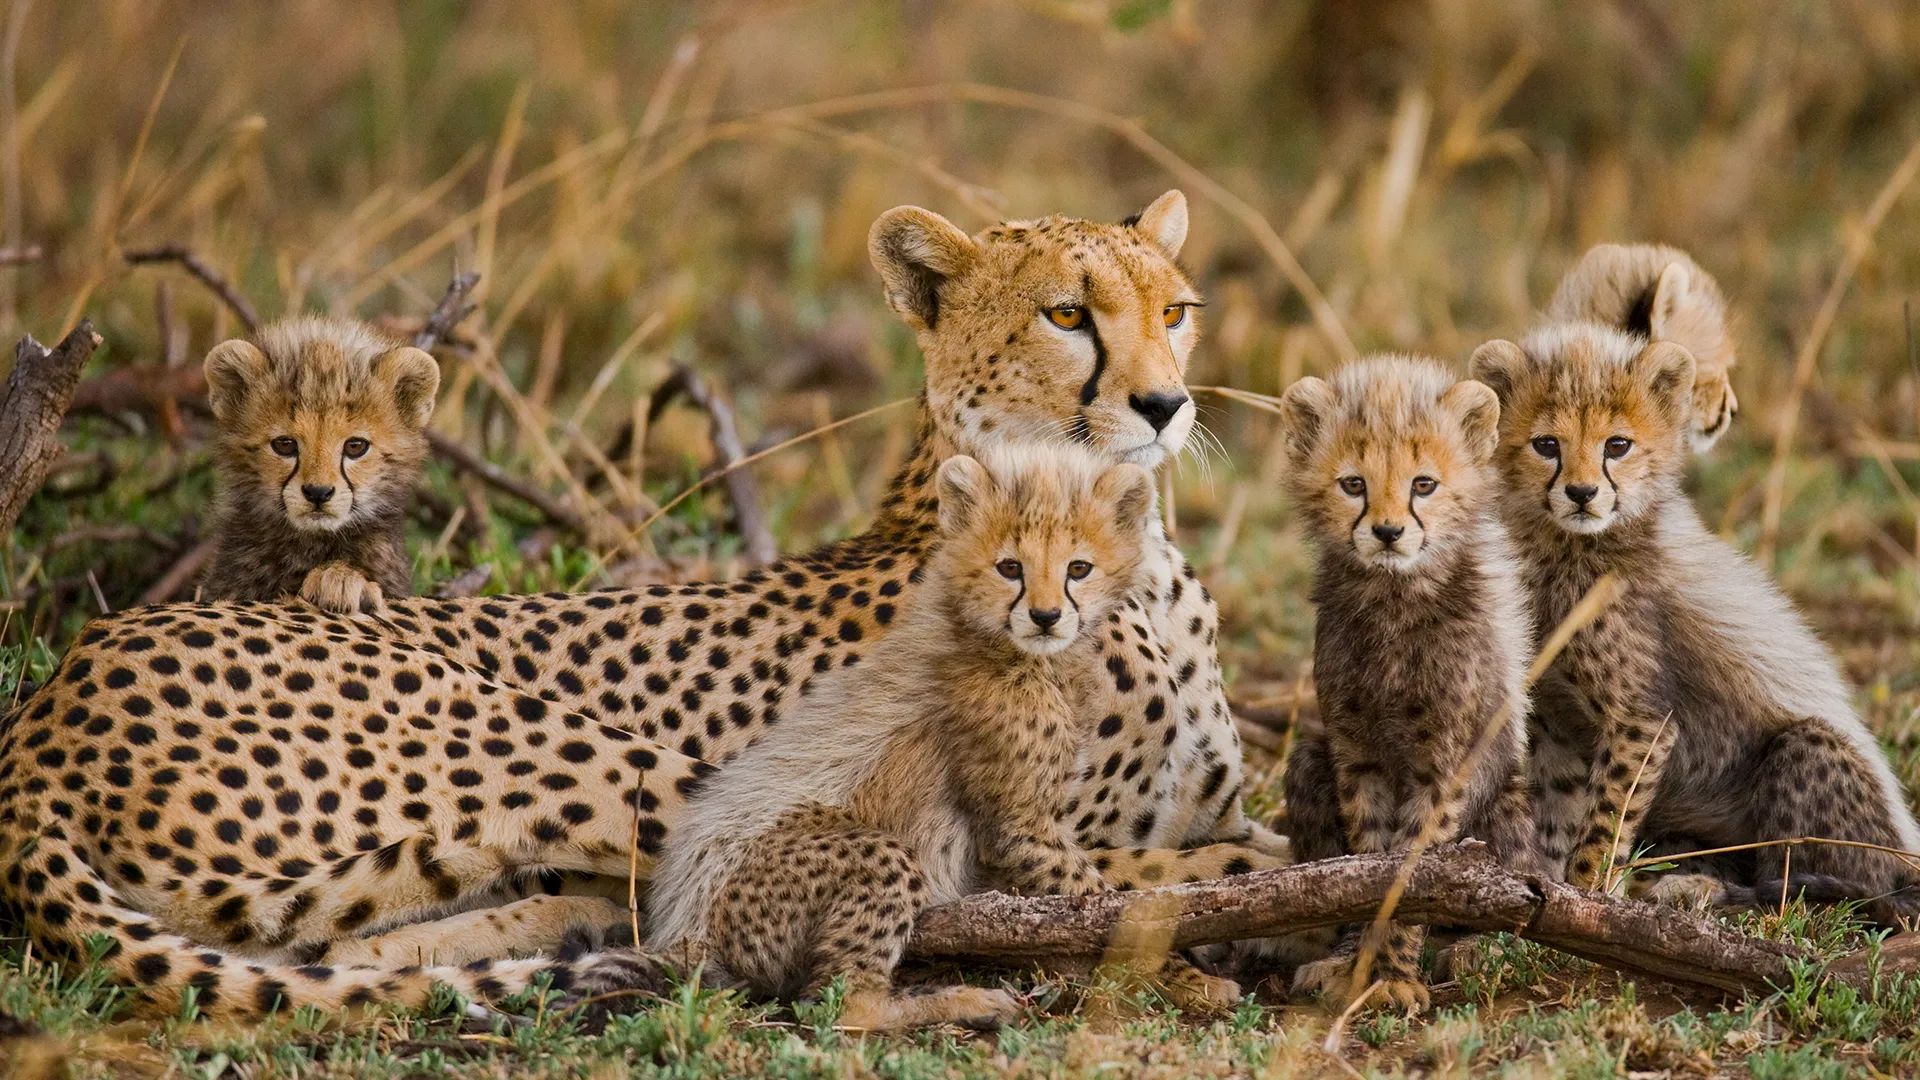 A cheetah mother and her cubs in their natural habitat in Africa